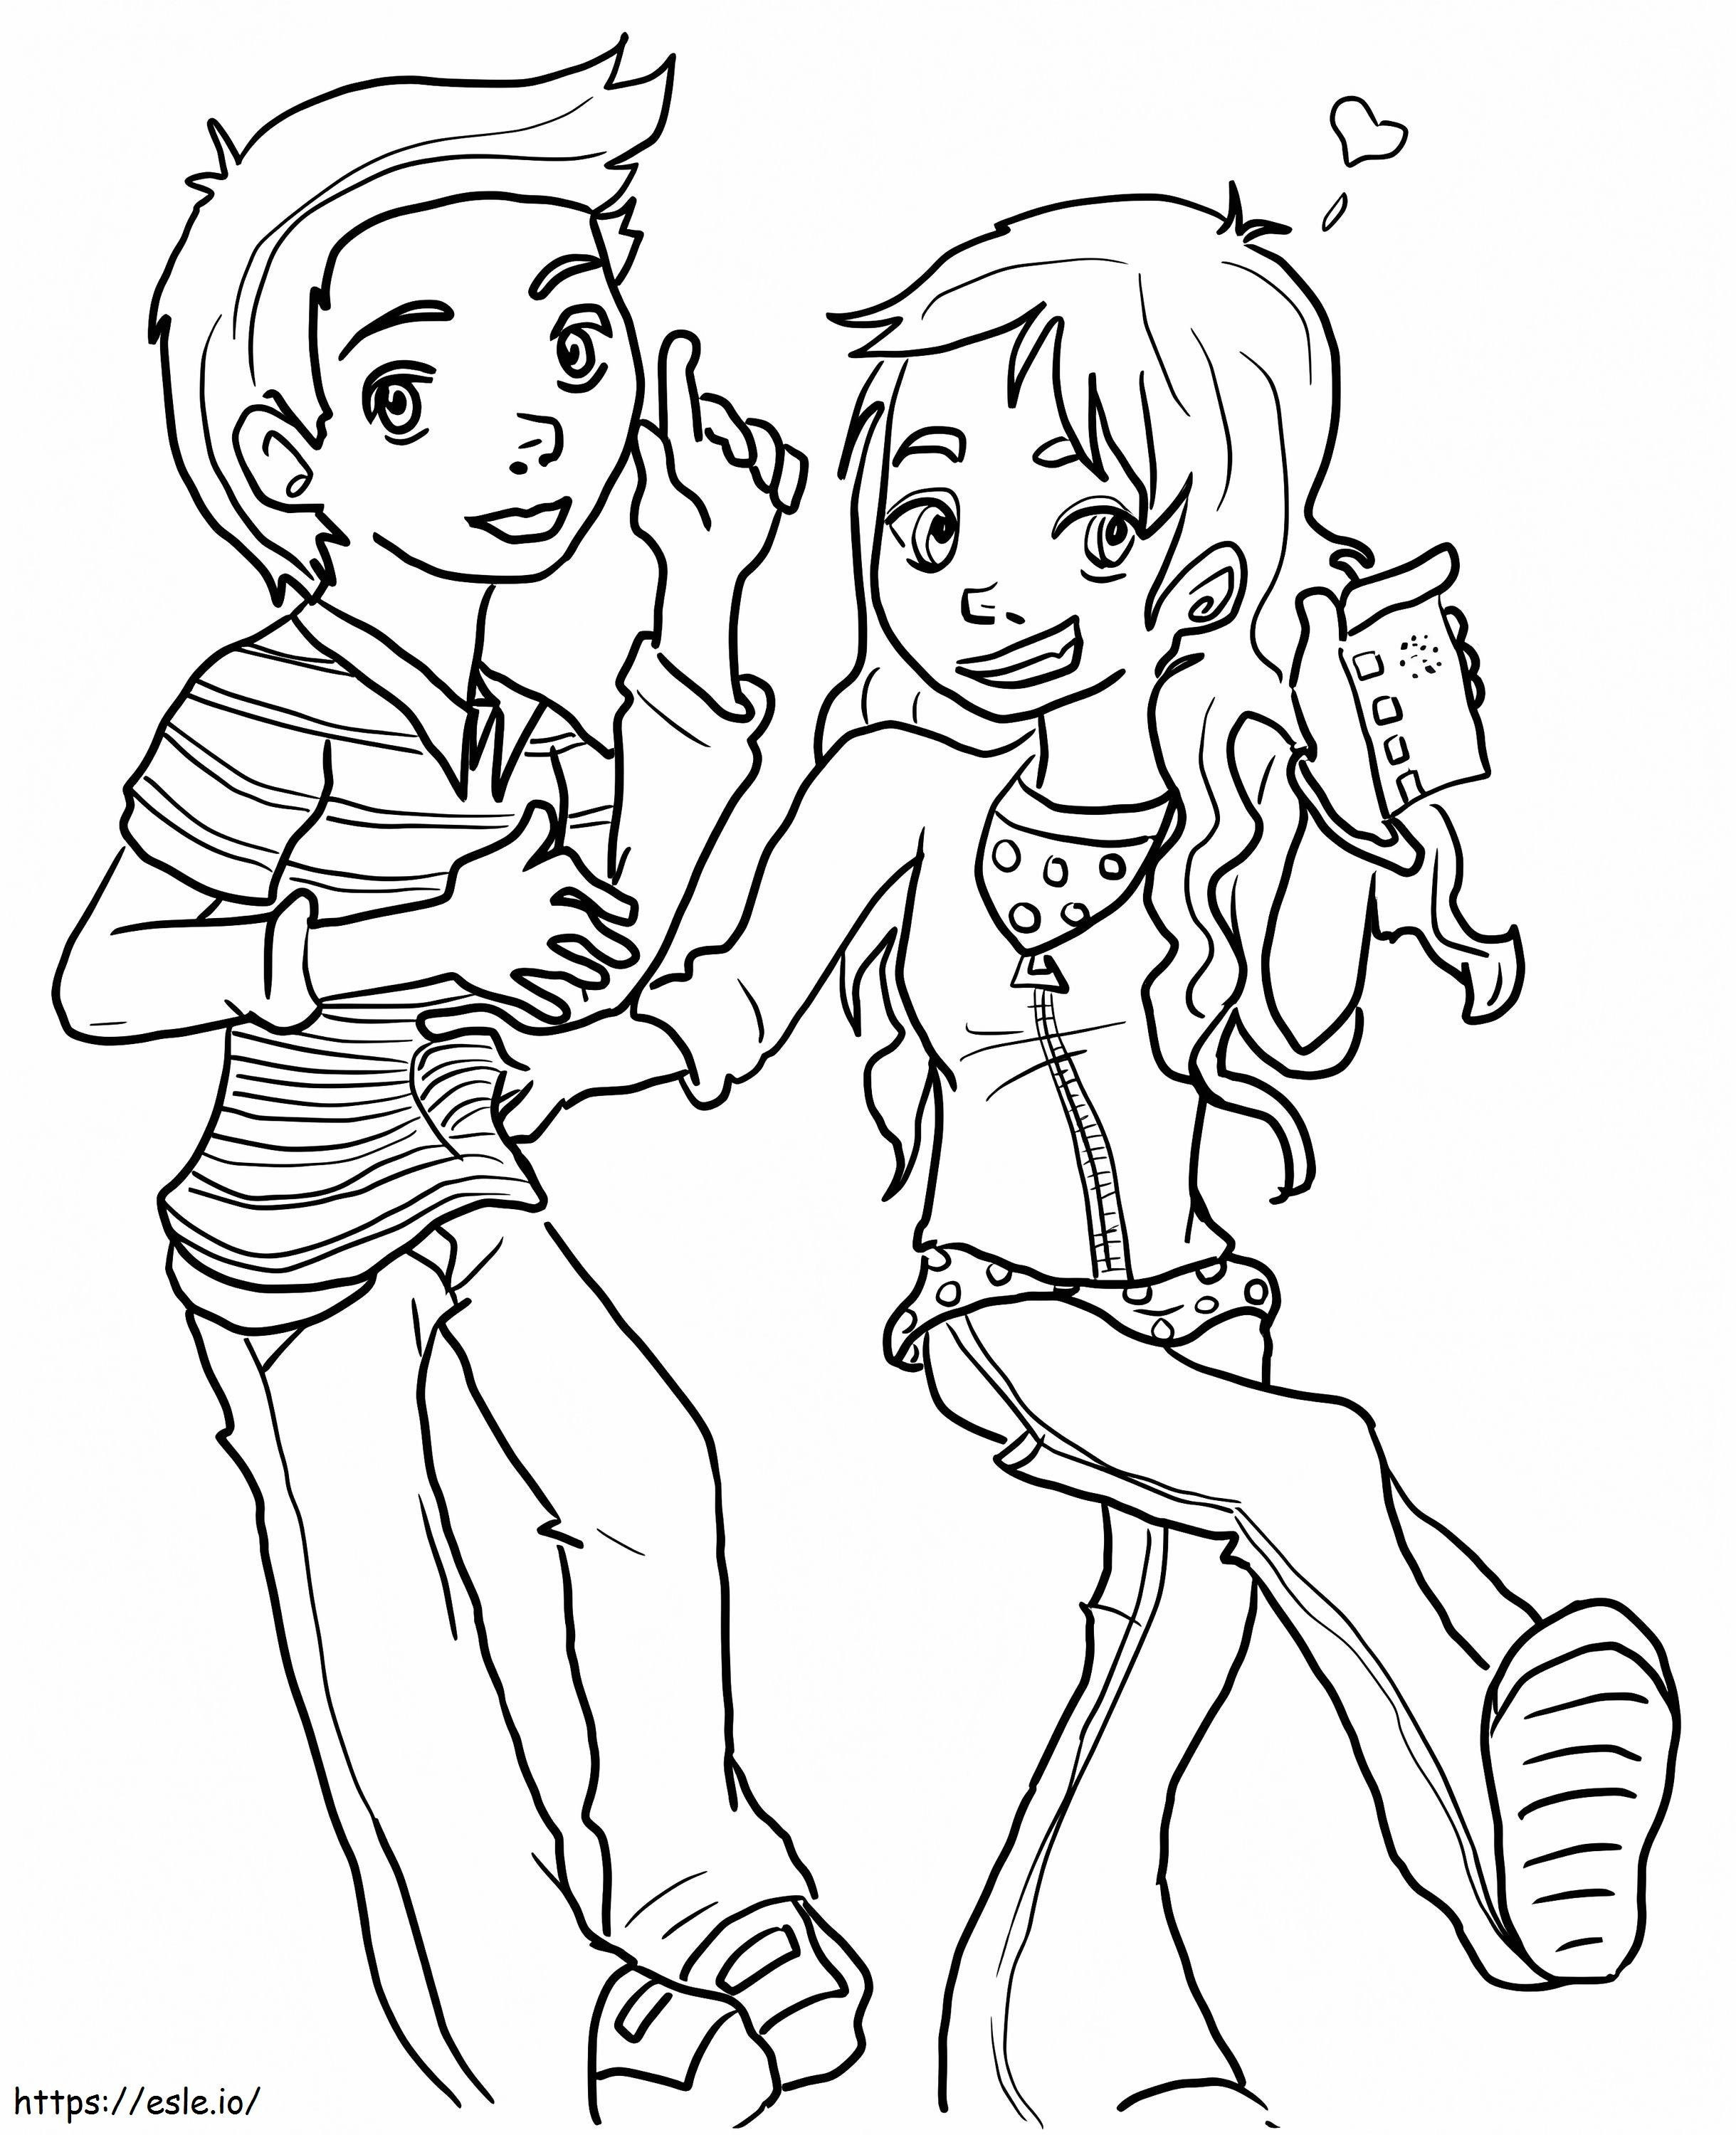 Sam And Freddie coloring page